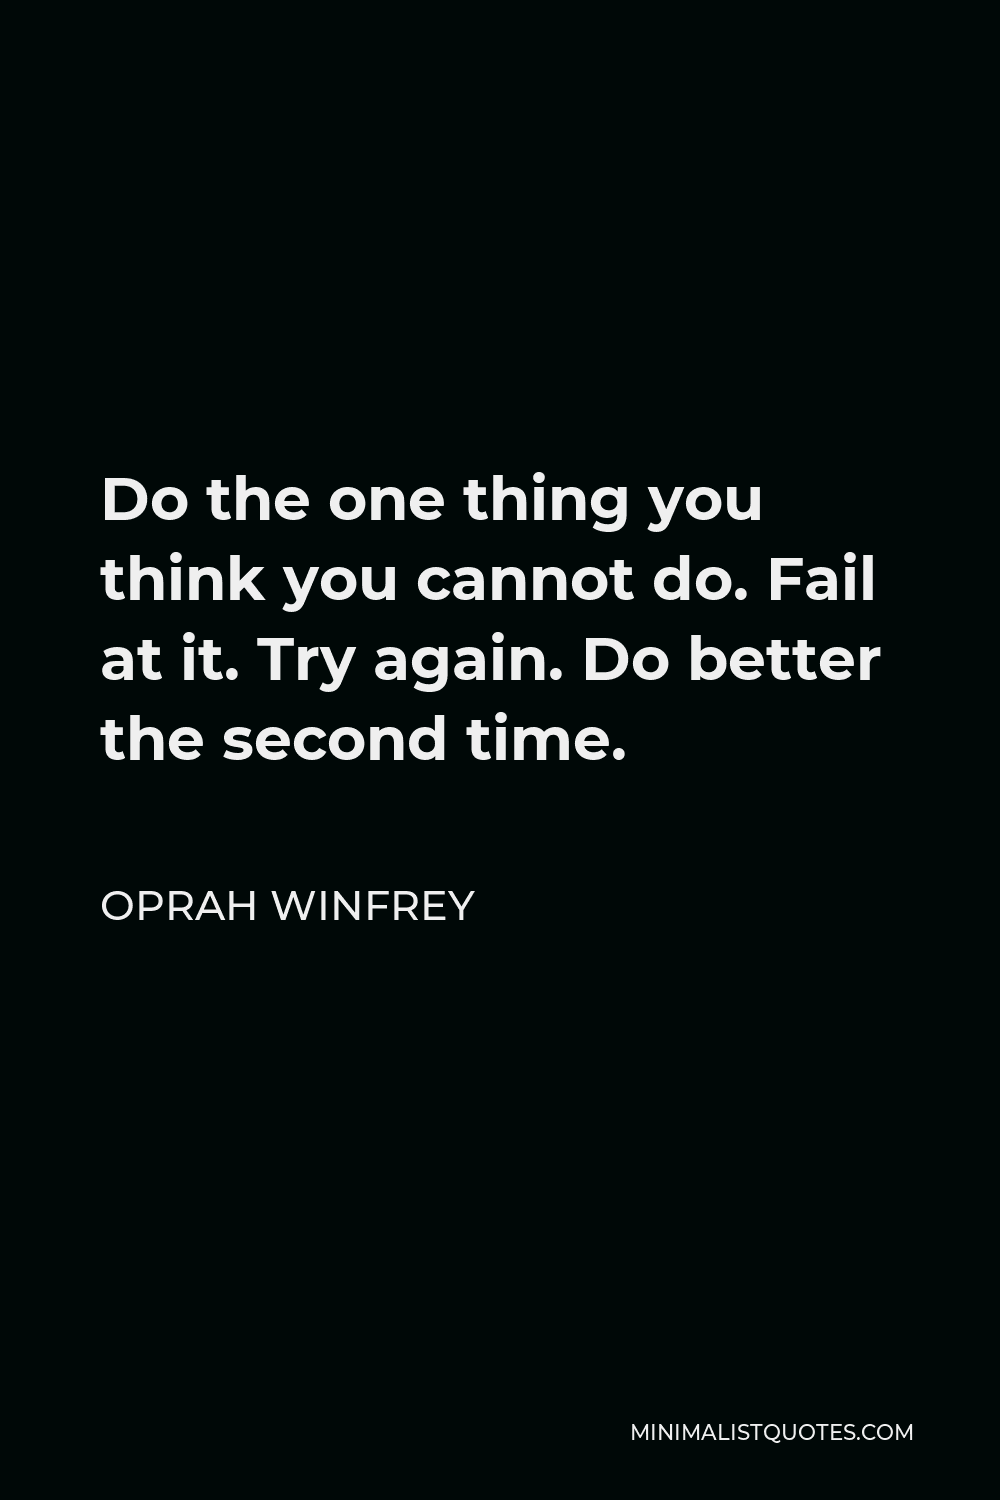 Oprah Winfrey Quote - Do the one thing you think you cannot do. Fail at it. Try again. Do better the second time.